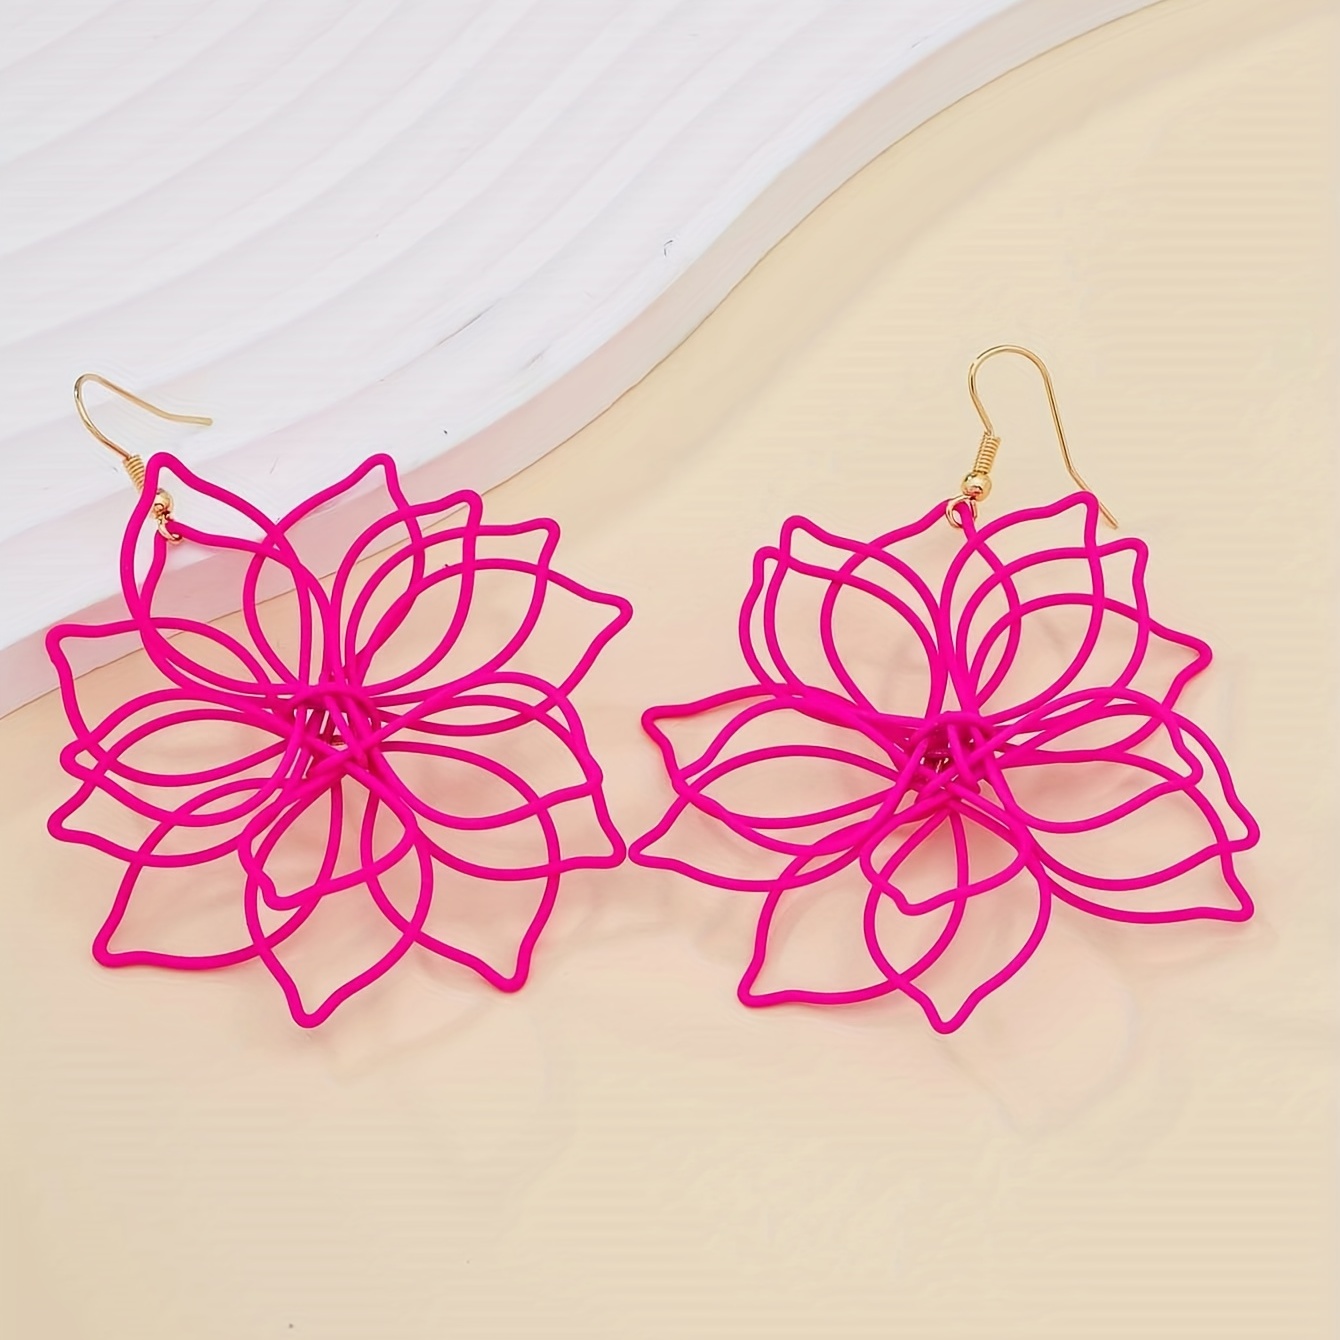 

Hot Pink Color Exquisite Hollow Flower Design Dangle Earrings Cute Vacation Style Delicate Female Gift